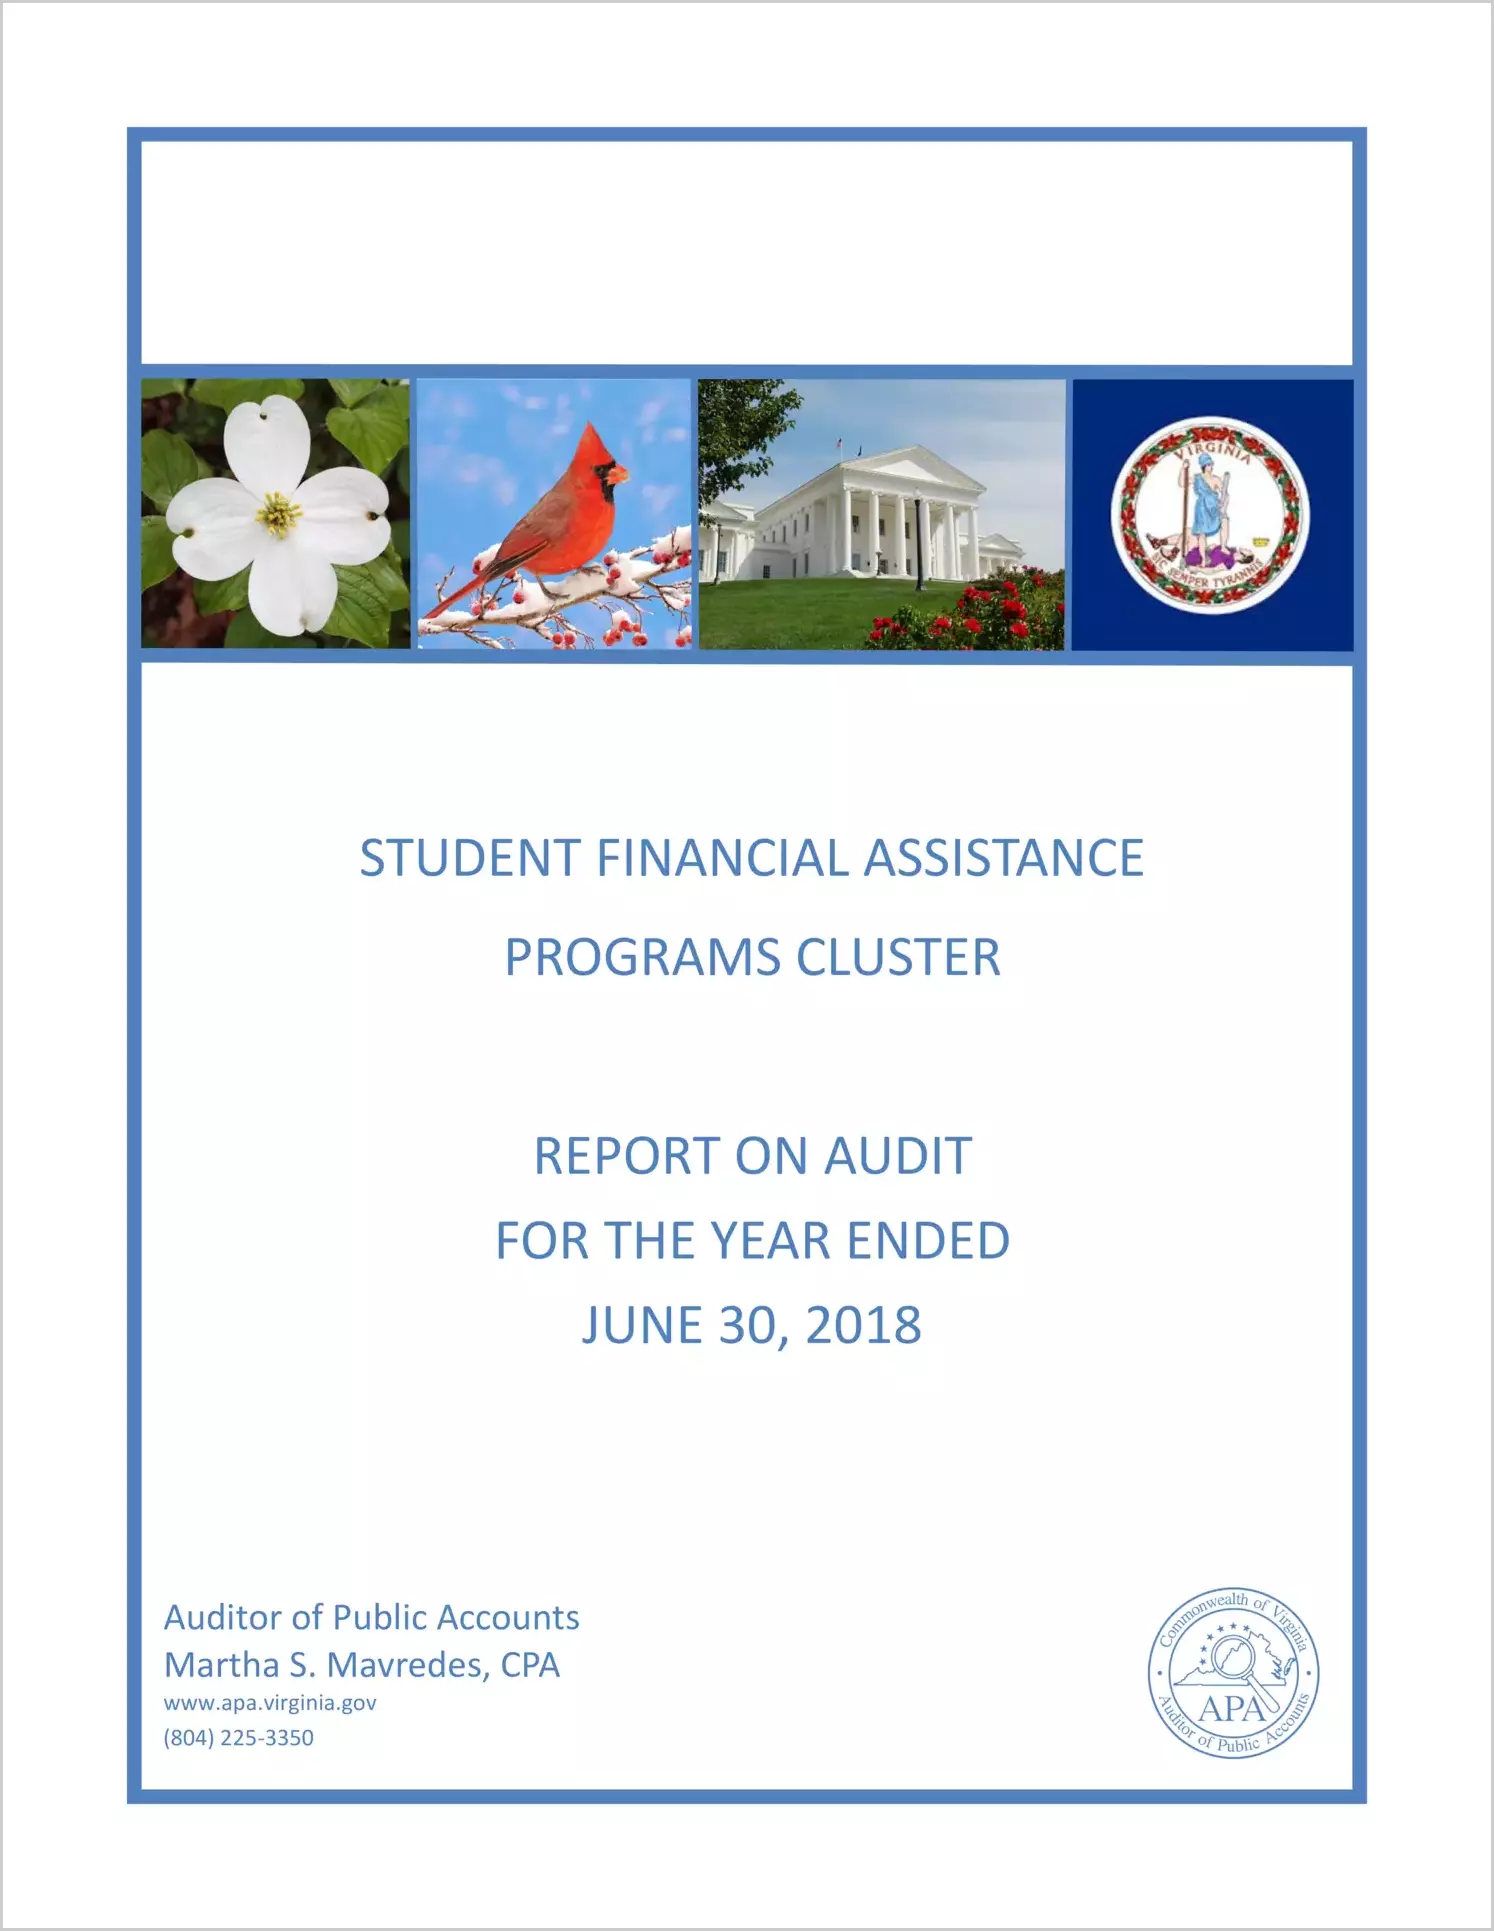 Student Financial Assistance Programs Cluster for the year ended June 30, 2018